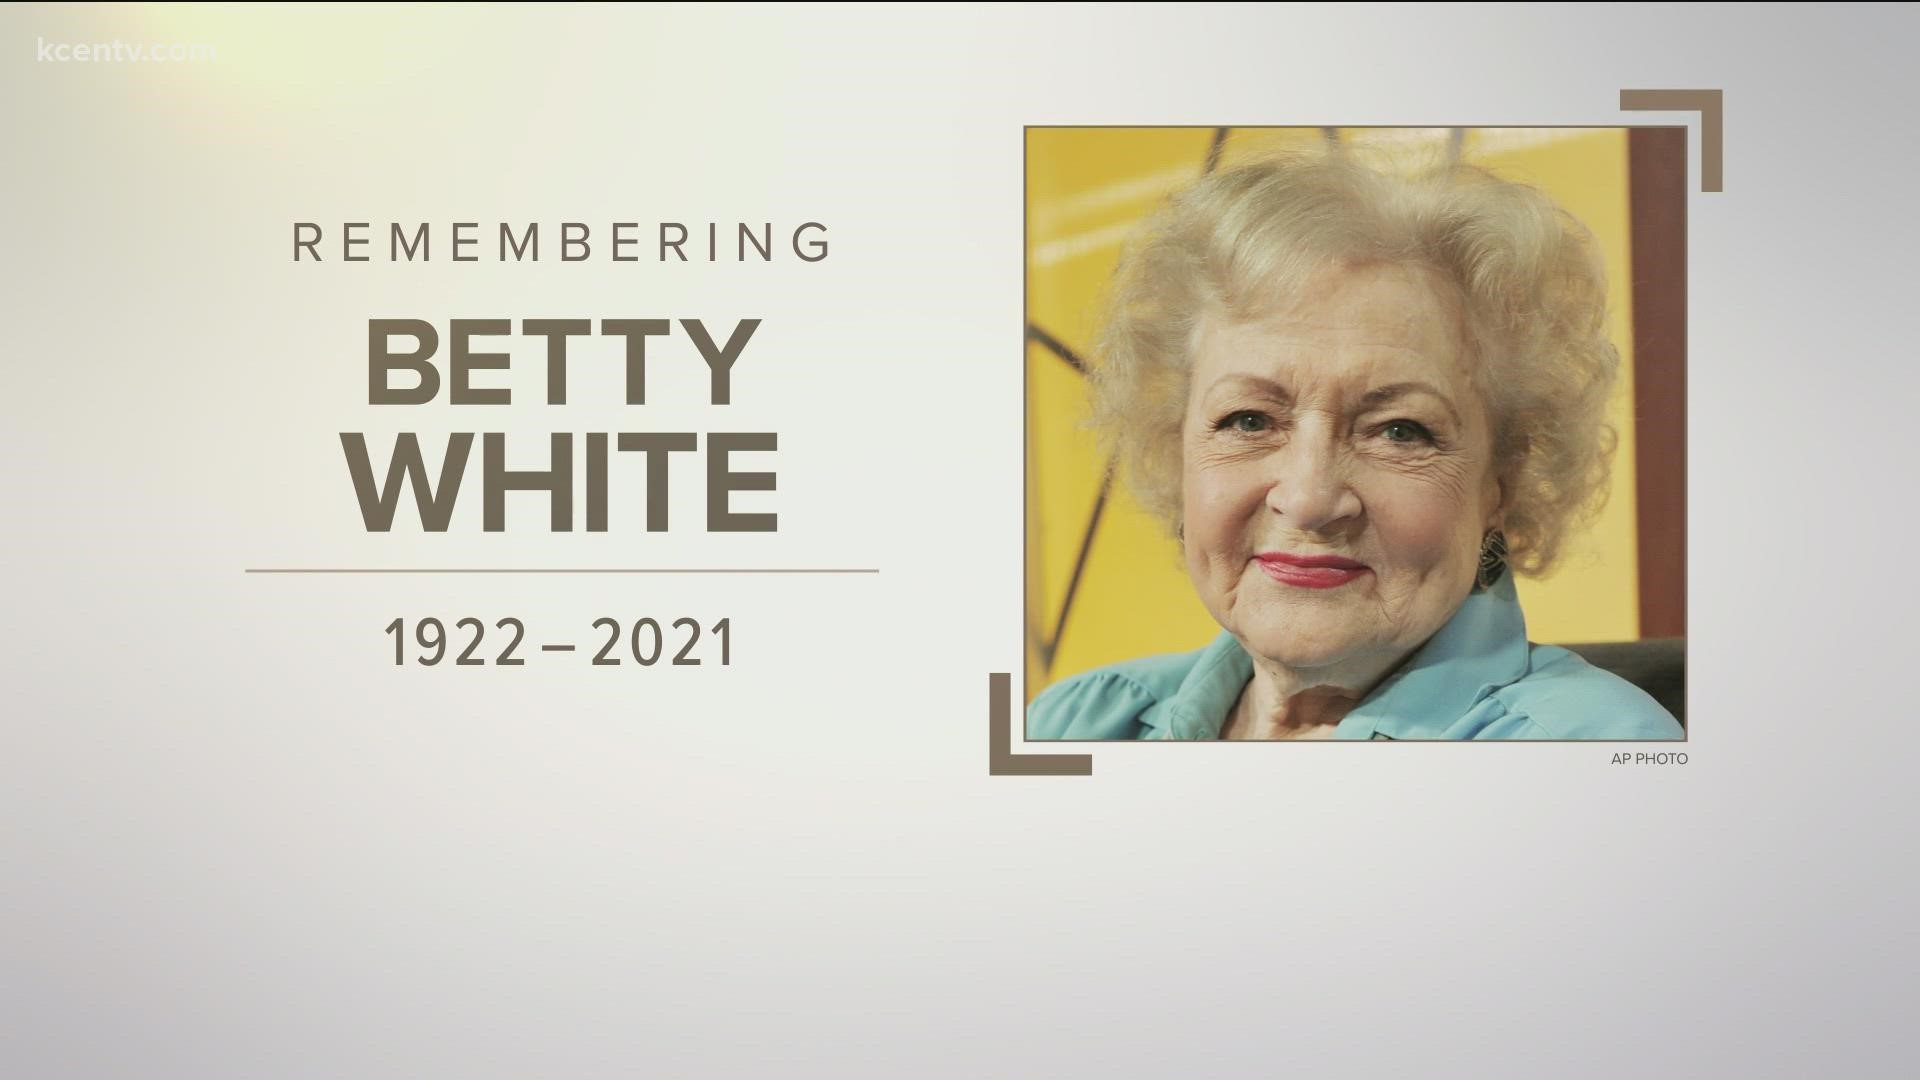 The Hollywood icon was just weeks short of reaching her 100th birthday on Jan. 17.